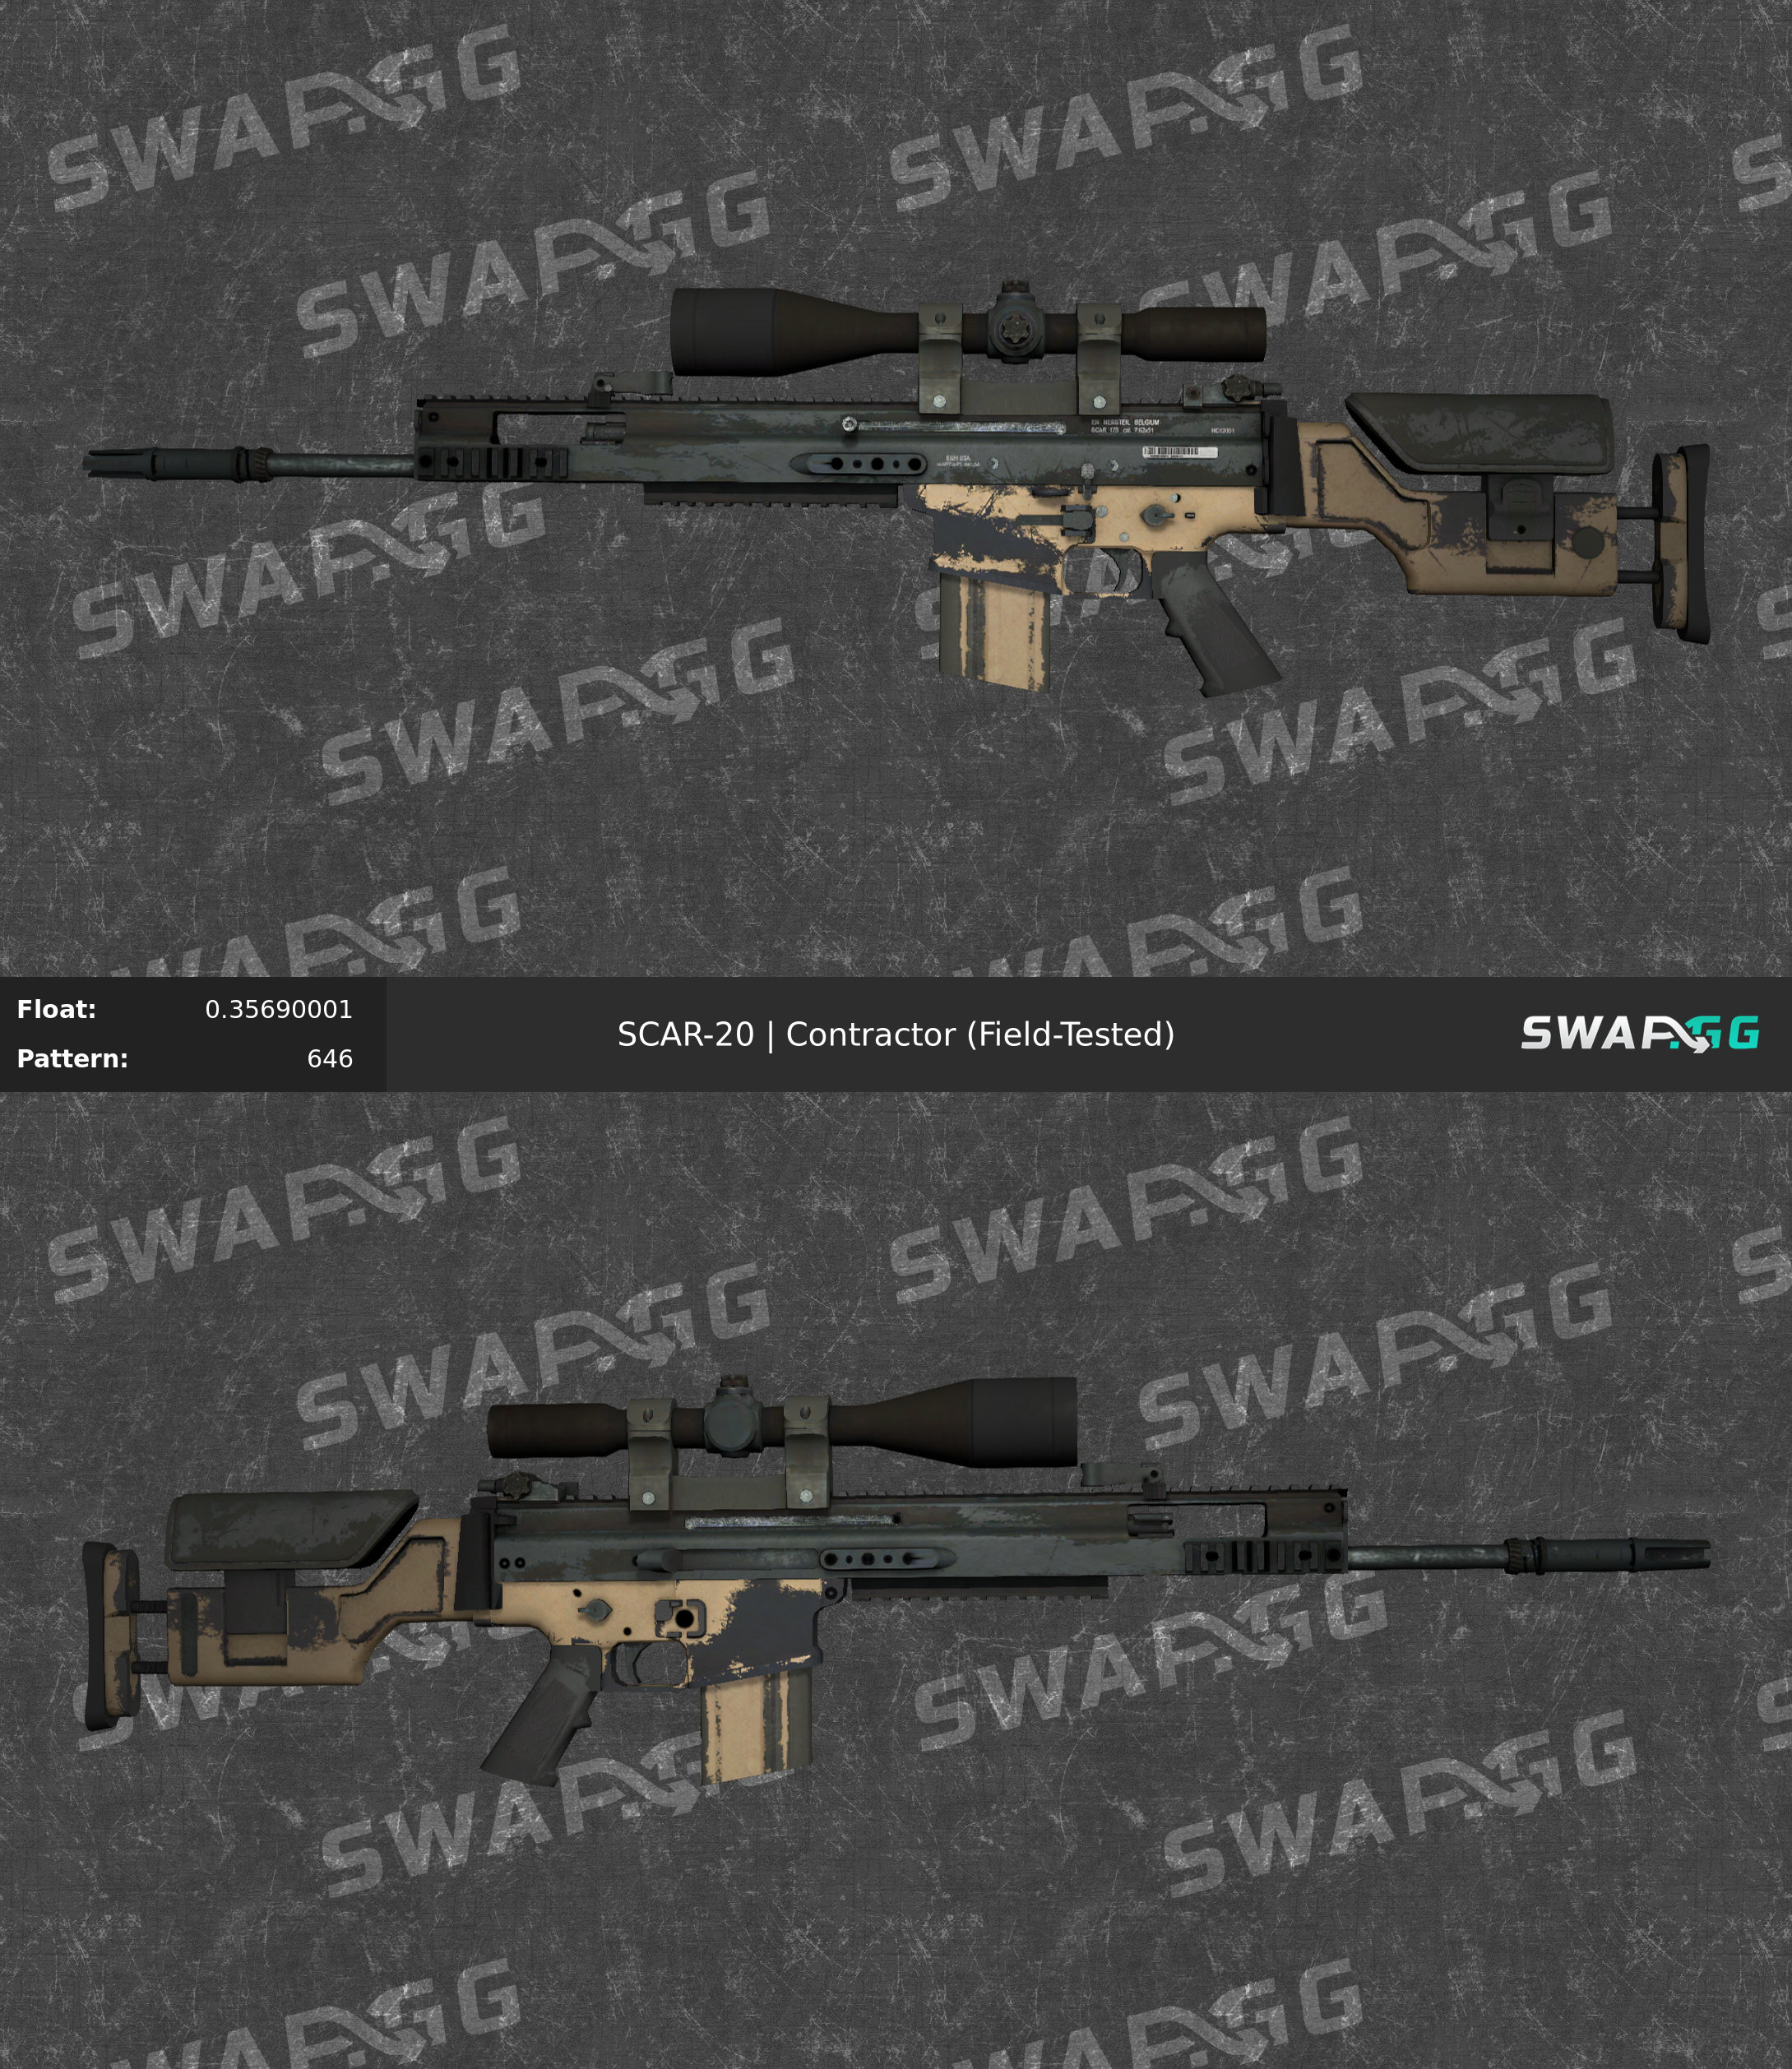 SCAR-20 Contractor cs go skin instal the new for ios